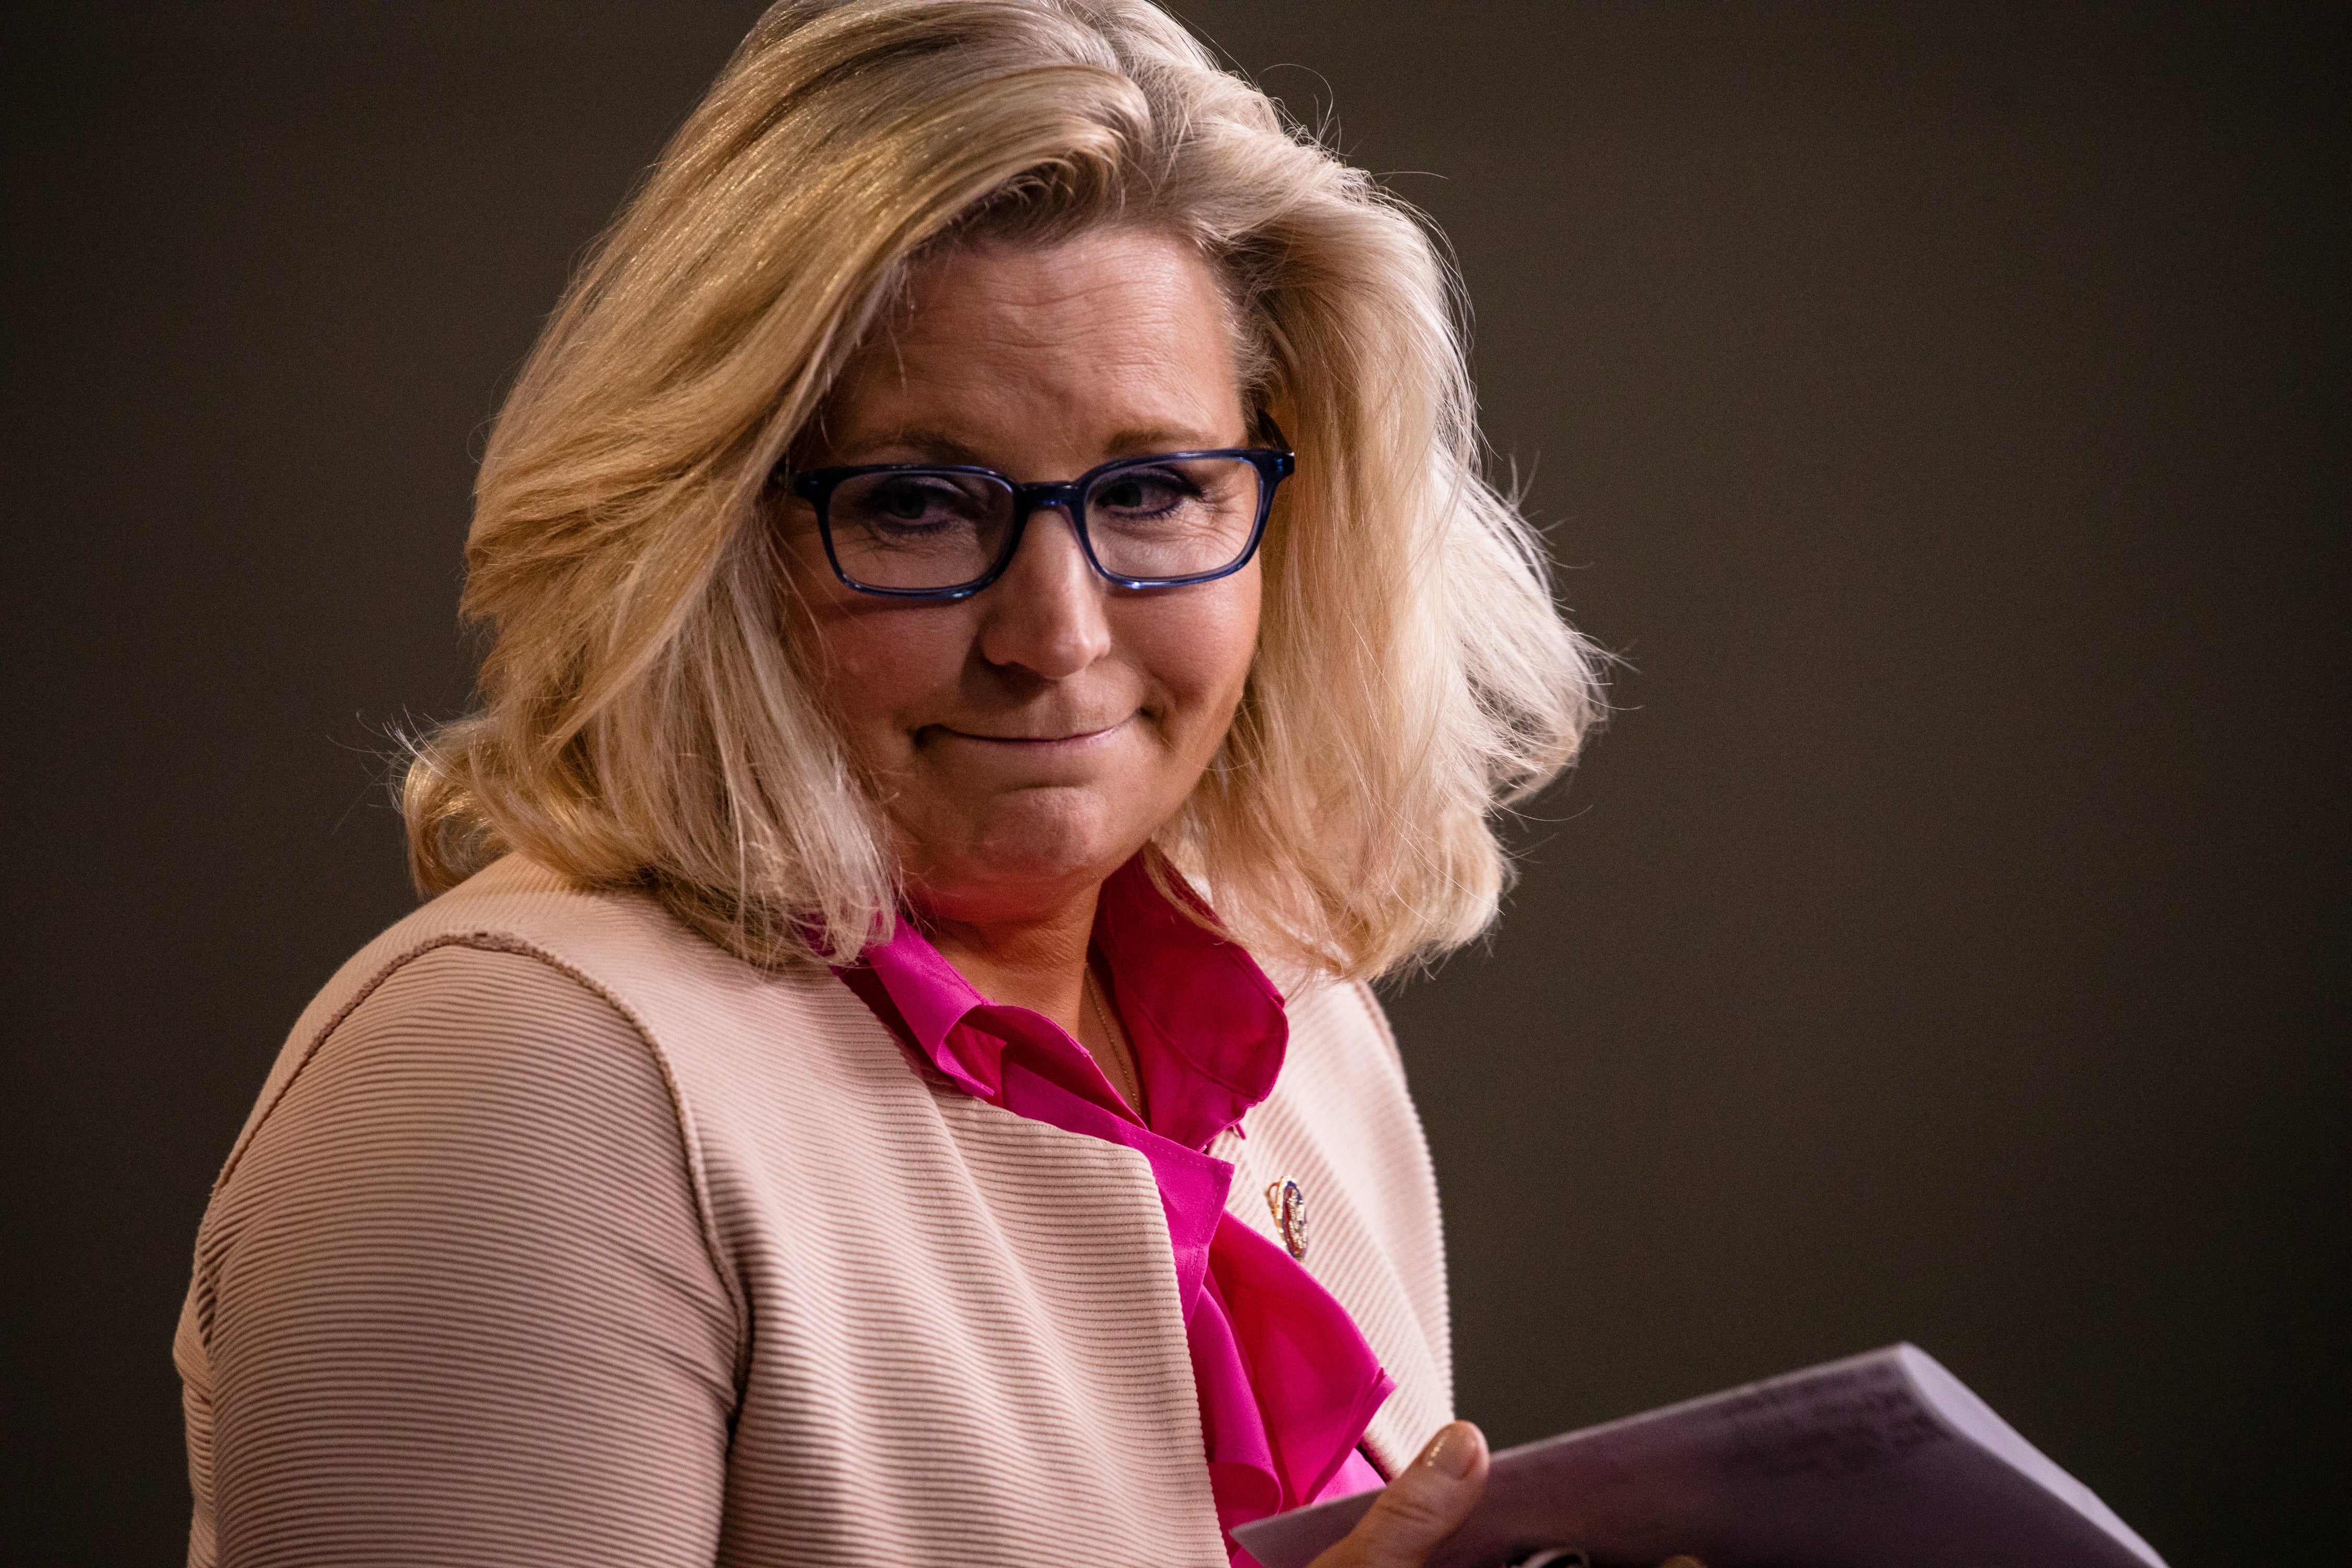 These are difficult days for Liz Cheney